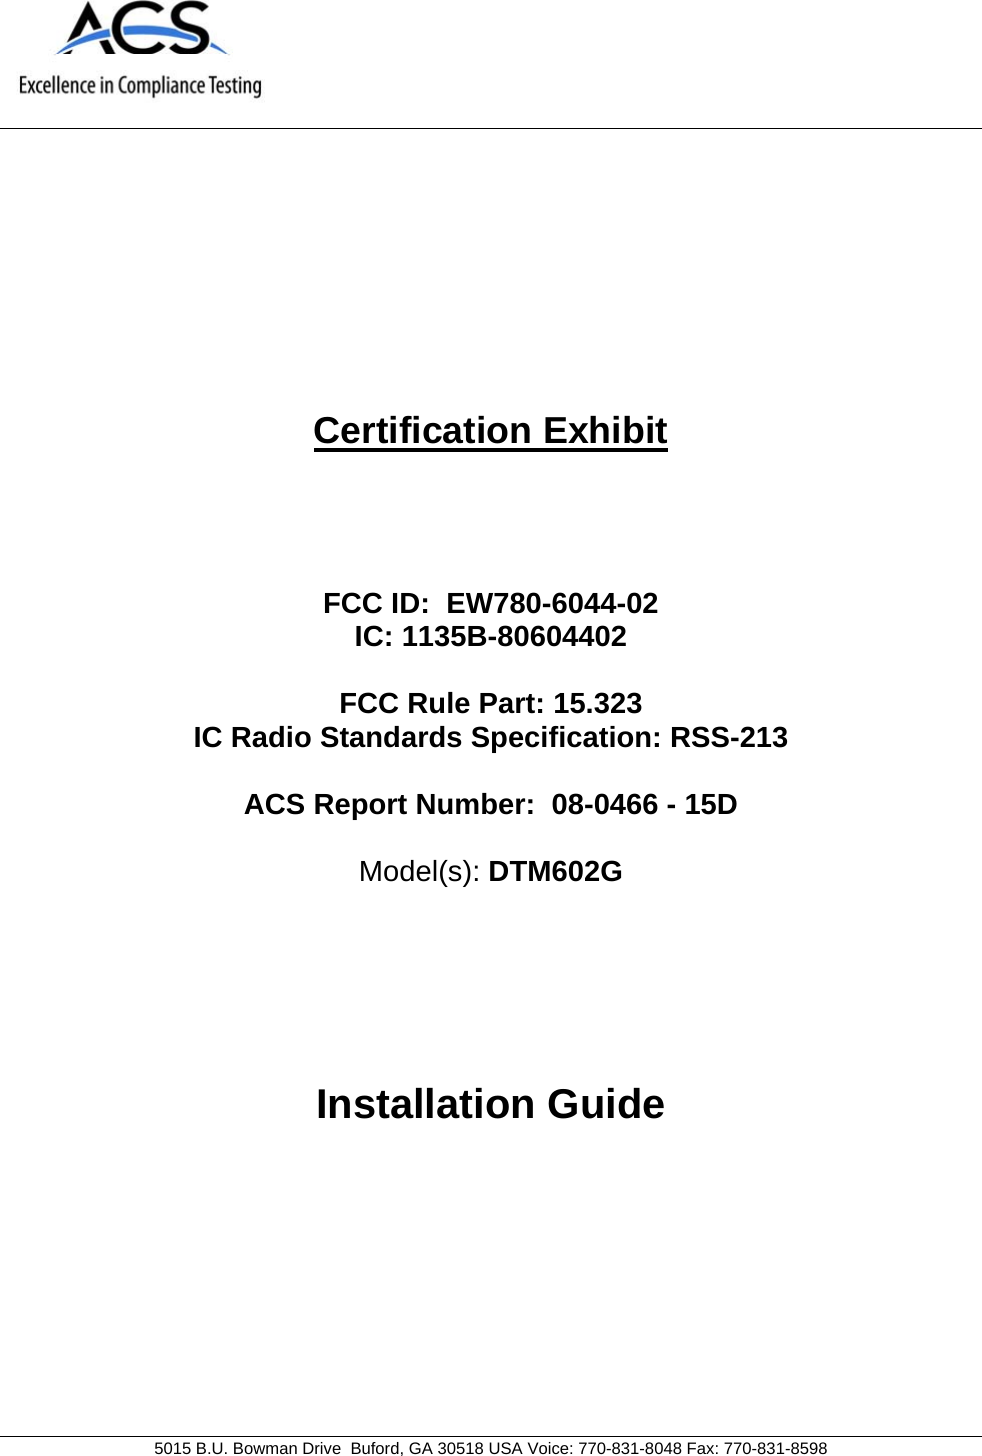     5015 B.U. Bowman Drive  Buford, GA 30518 USA Voice: 770-831-8048 Fax: 770-831-8598   Certification Exhibit     FCC ID:  EW780-6044-02 IC: 1135B-80604402  FCC Rule Part: 15.323 IC Radio Standards Specification: RSS-213  ACS Report Number:  08-0466 - 15D   Model(s): DTM602G     Installation Guide  